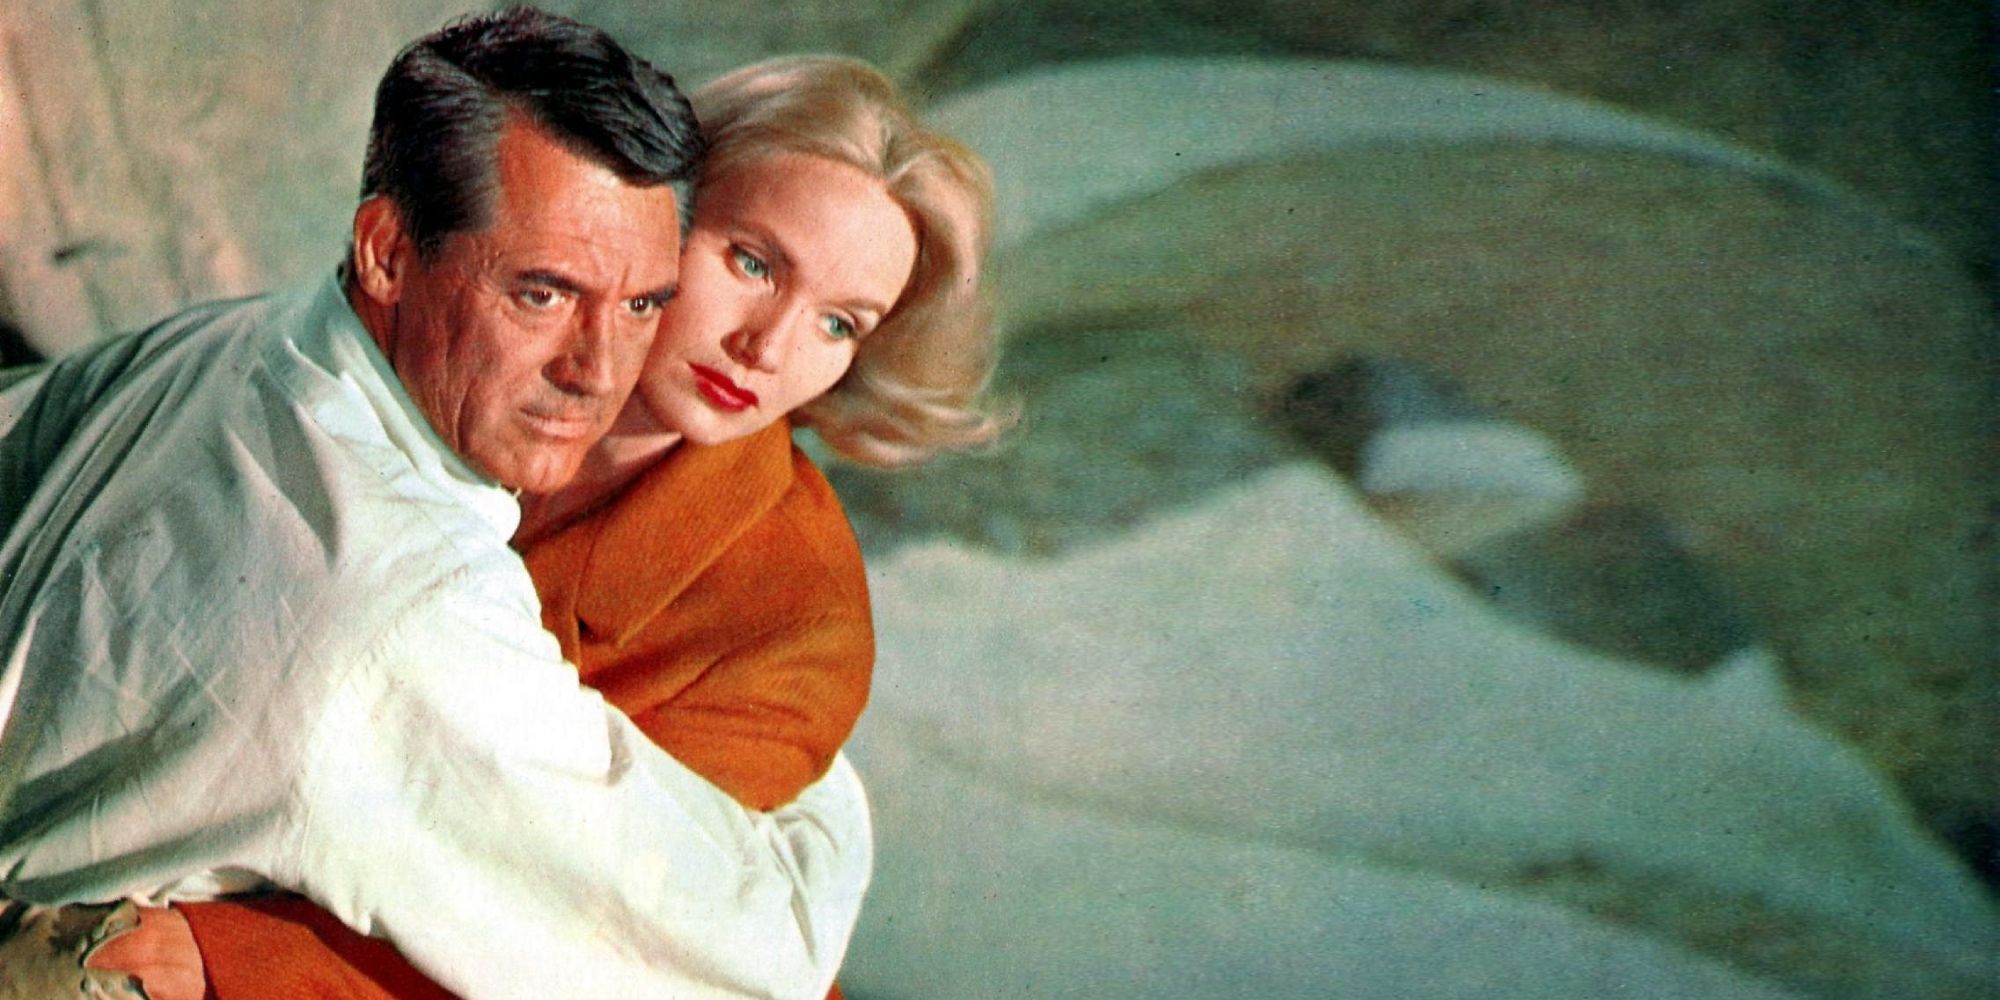 Roger and Eve embracing in North by Northwest